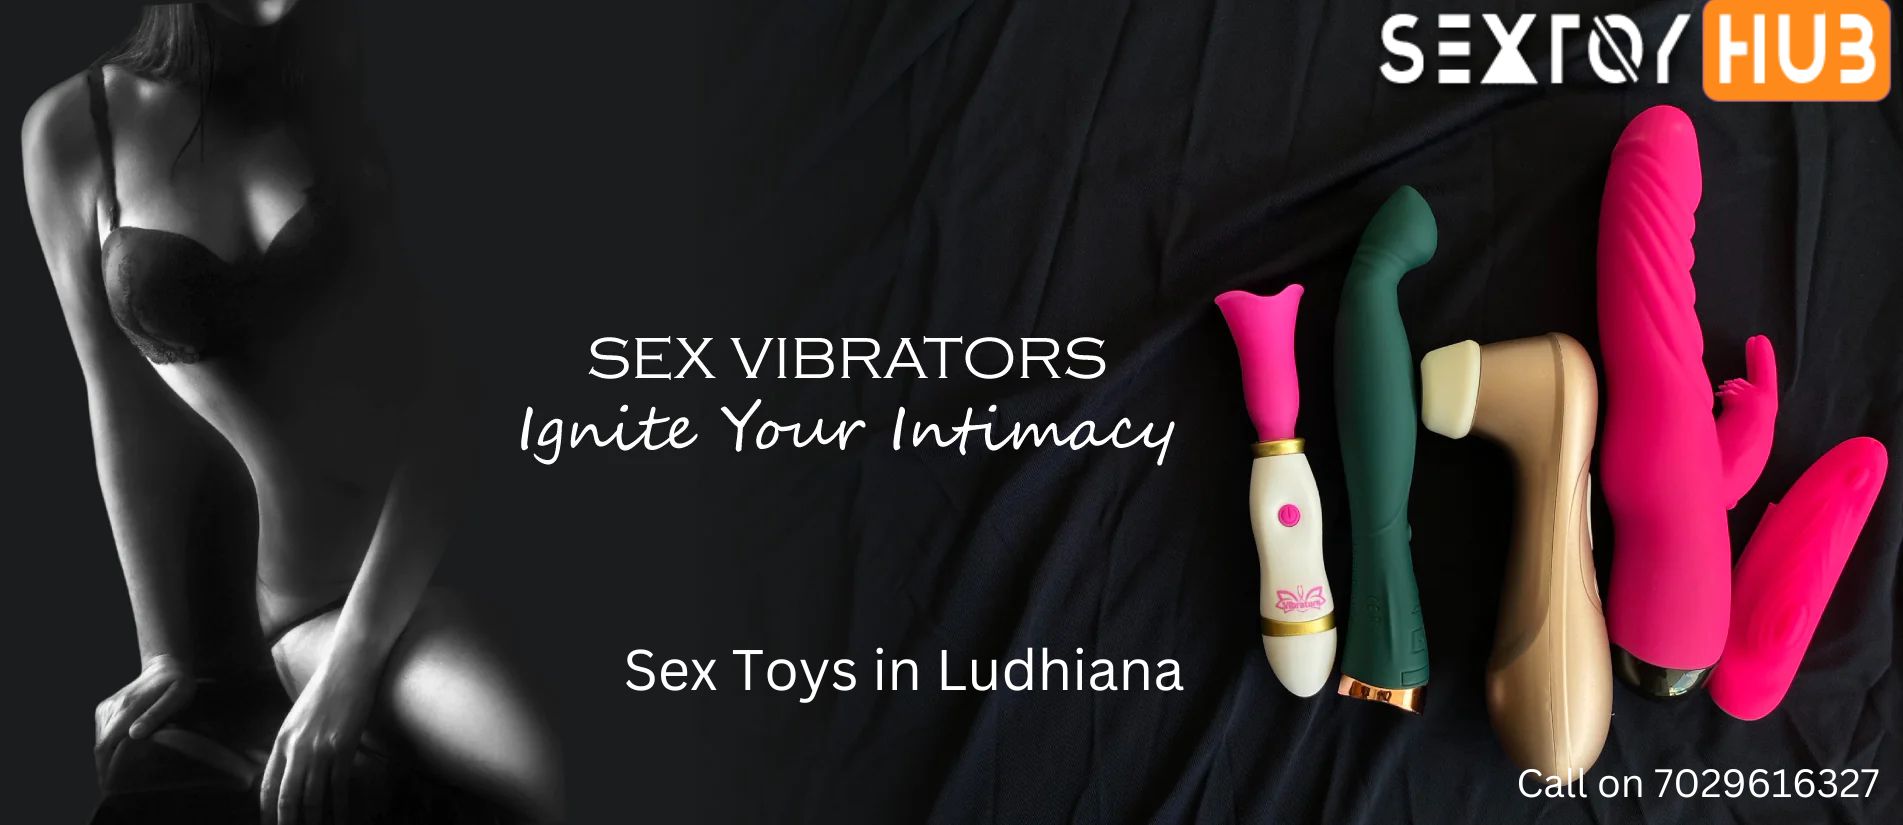 Huge Collection of Sex Toys in Ludhiana Call 7029616327 - Punjab - Ludhiana ID1519467